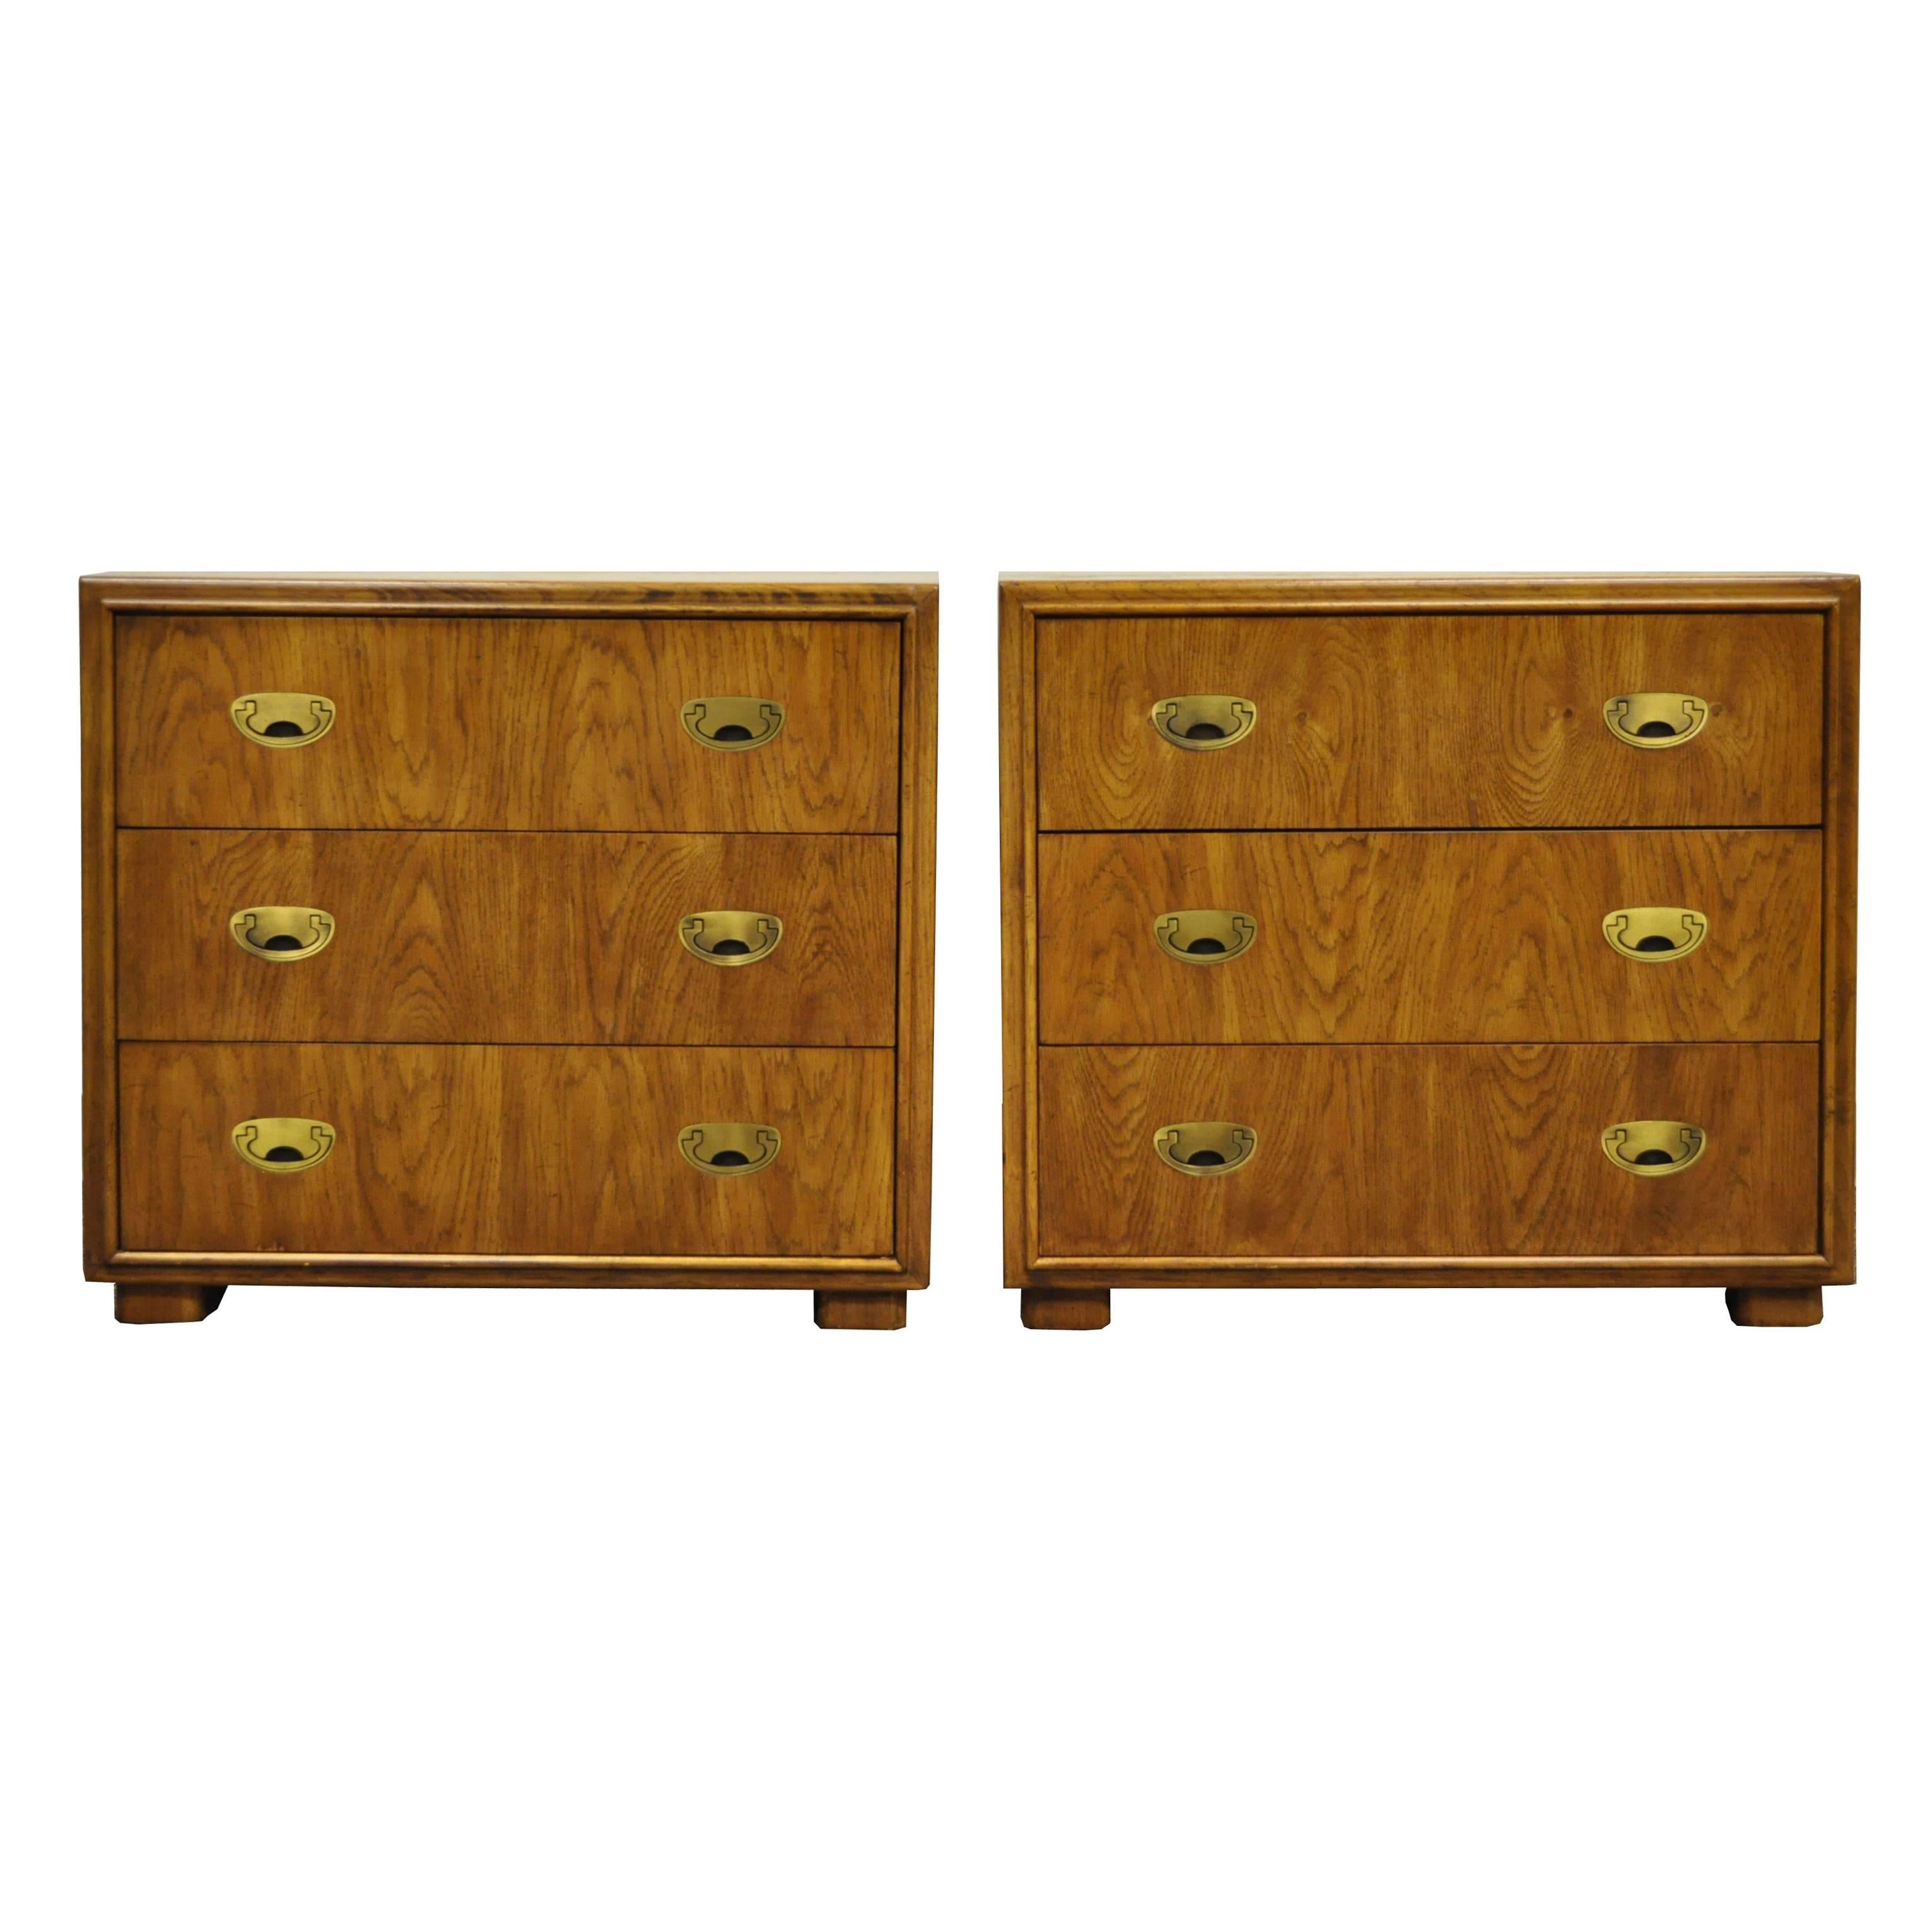 Great pair of Vintage, Hollywood Regency / Mid Century Modern, 3 drawer bachelor chests by Drexel Heritage. The pair features inset solid brass hardware, 3 dovetailed drawers each, beautiful wood grain throughout, all raised on block feet. Clean